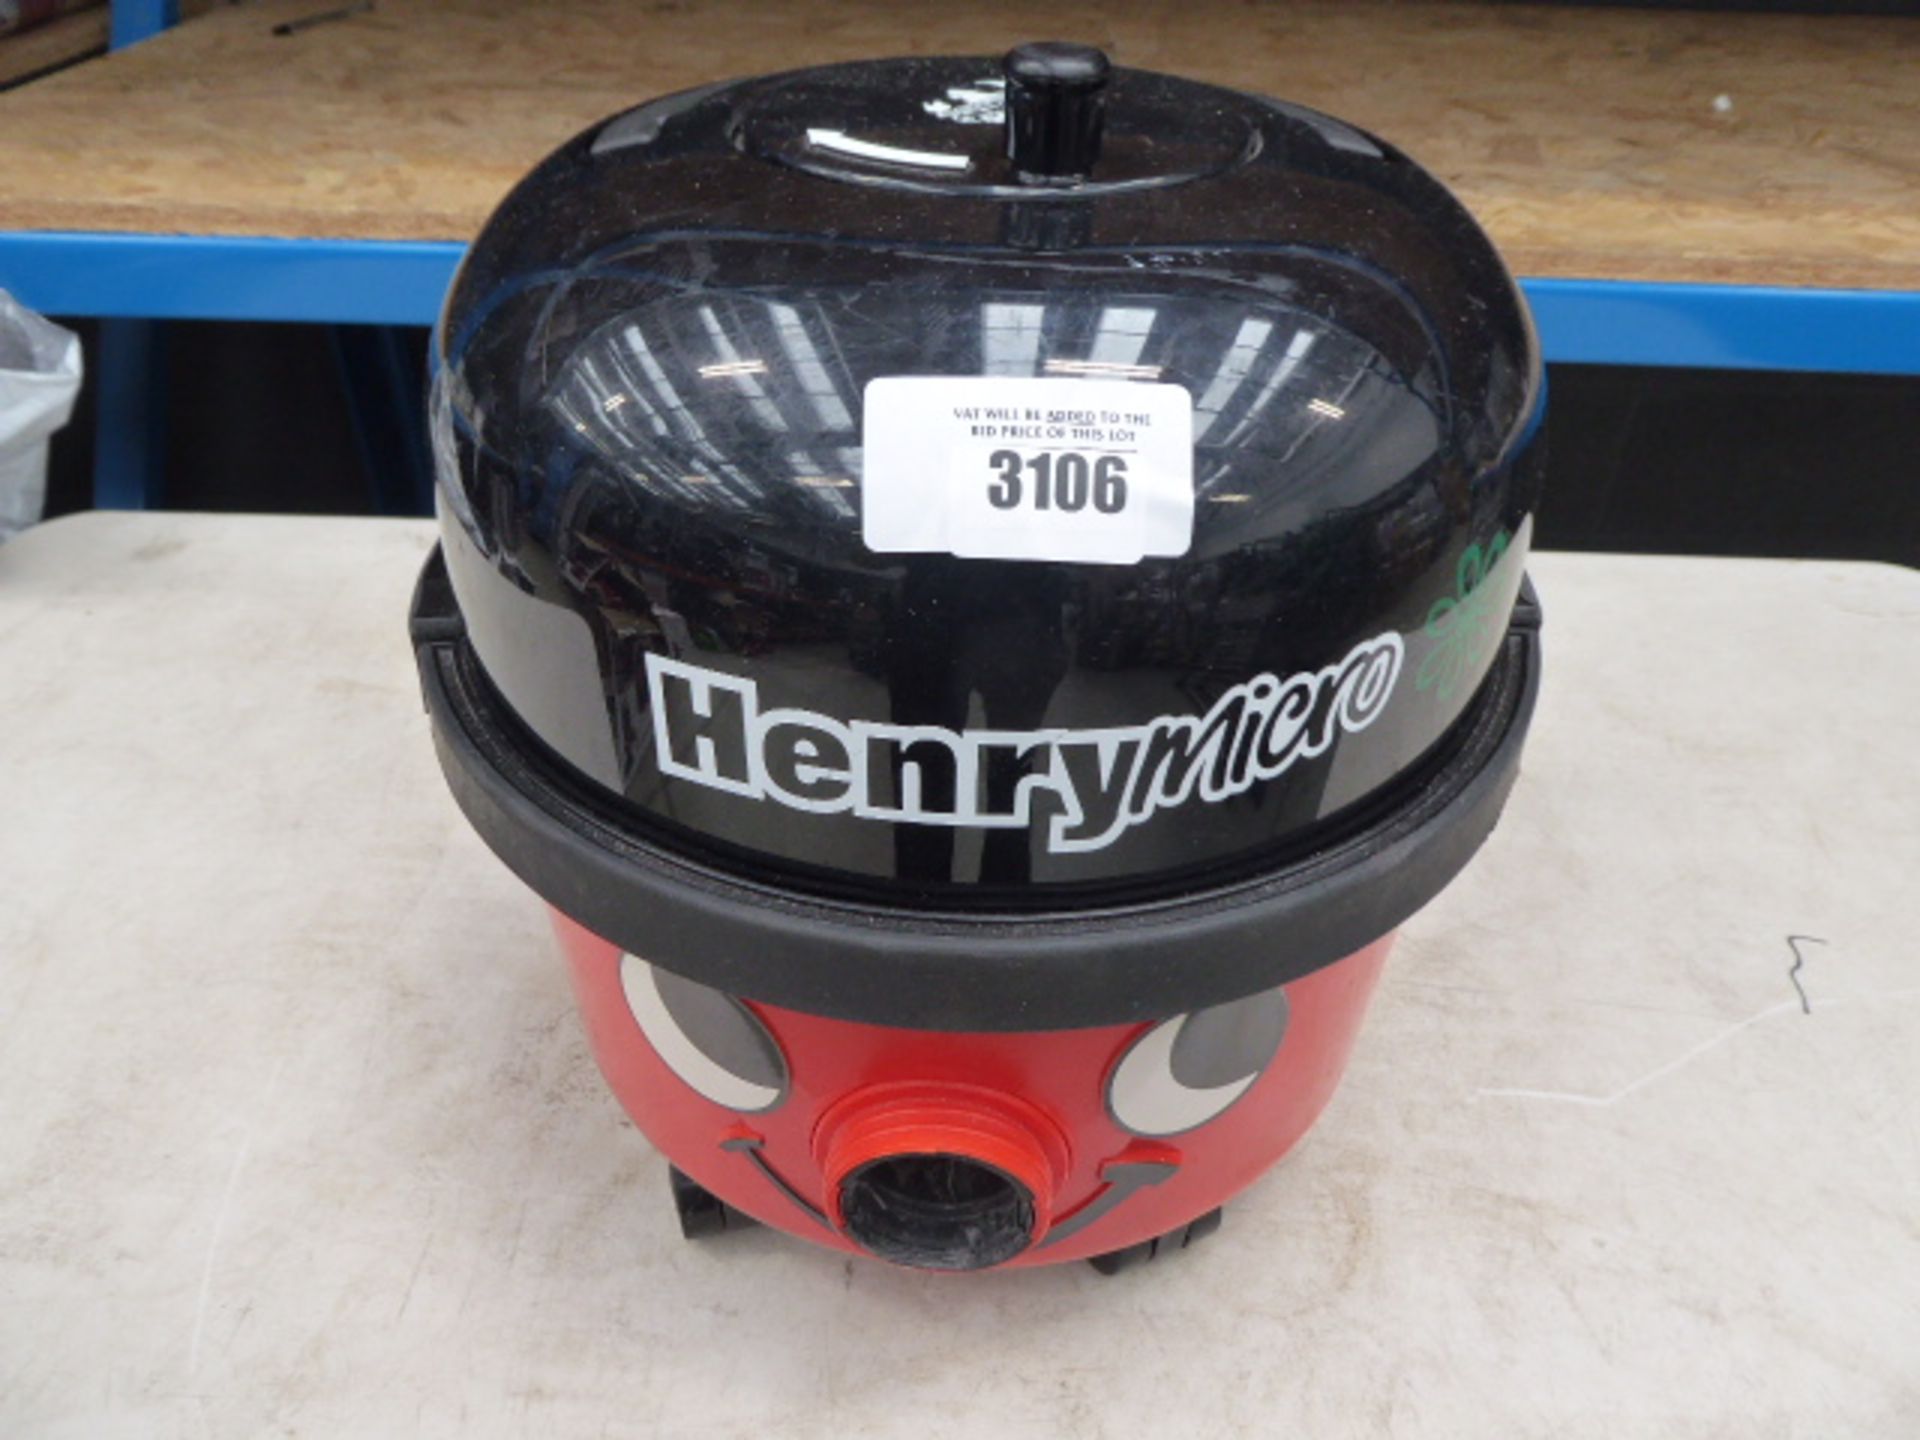 Henry Micro vacuum cleaner with no pipe or pole